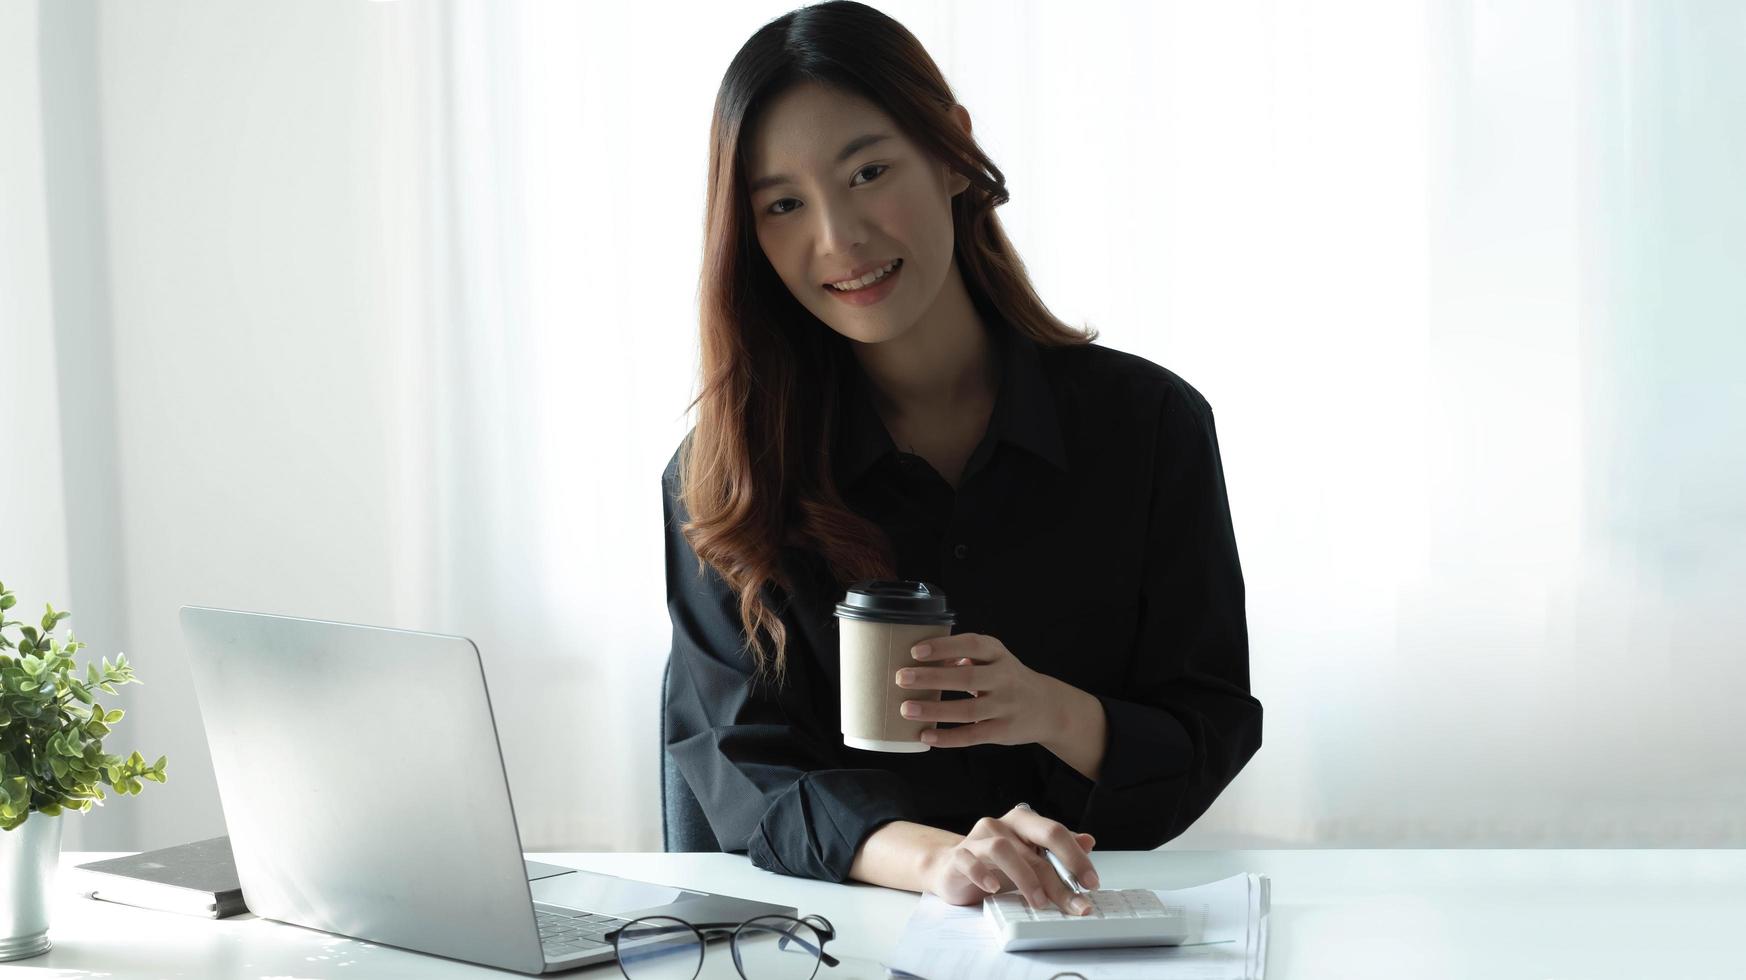 Smiling Asian businesswoman holding a coffee mug and laptop at the office. Looking at the camera. photo